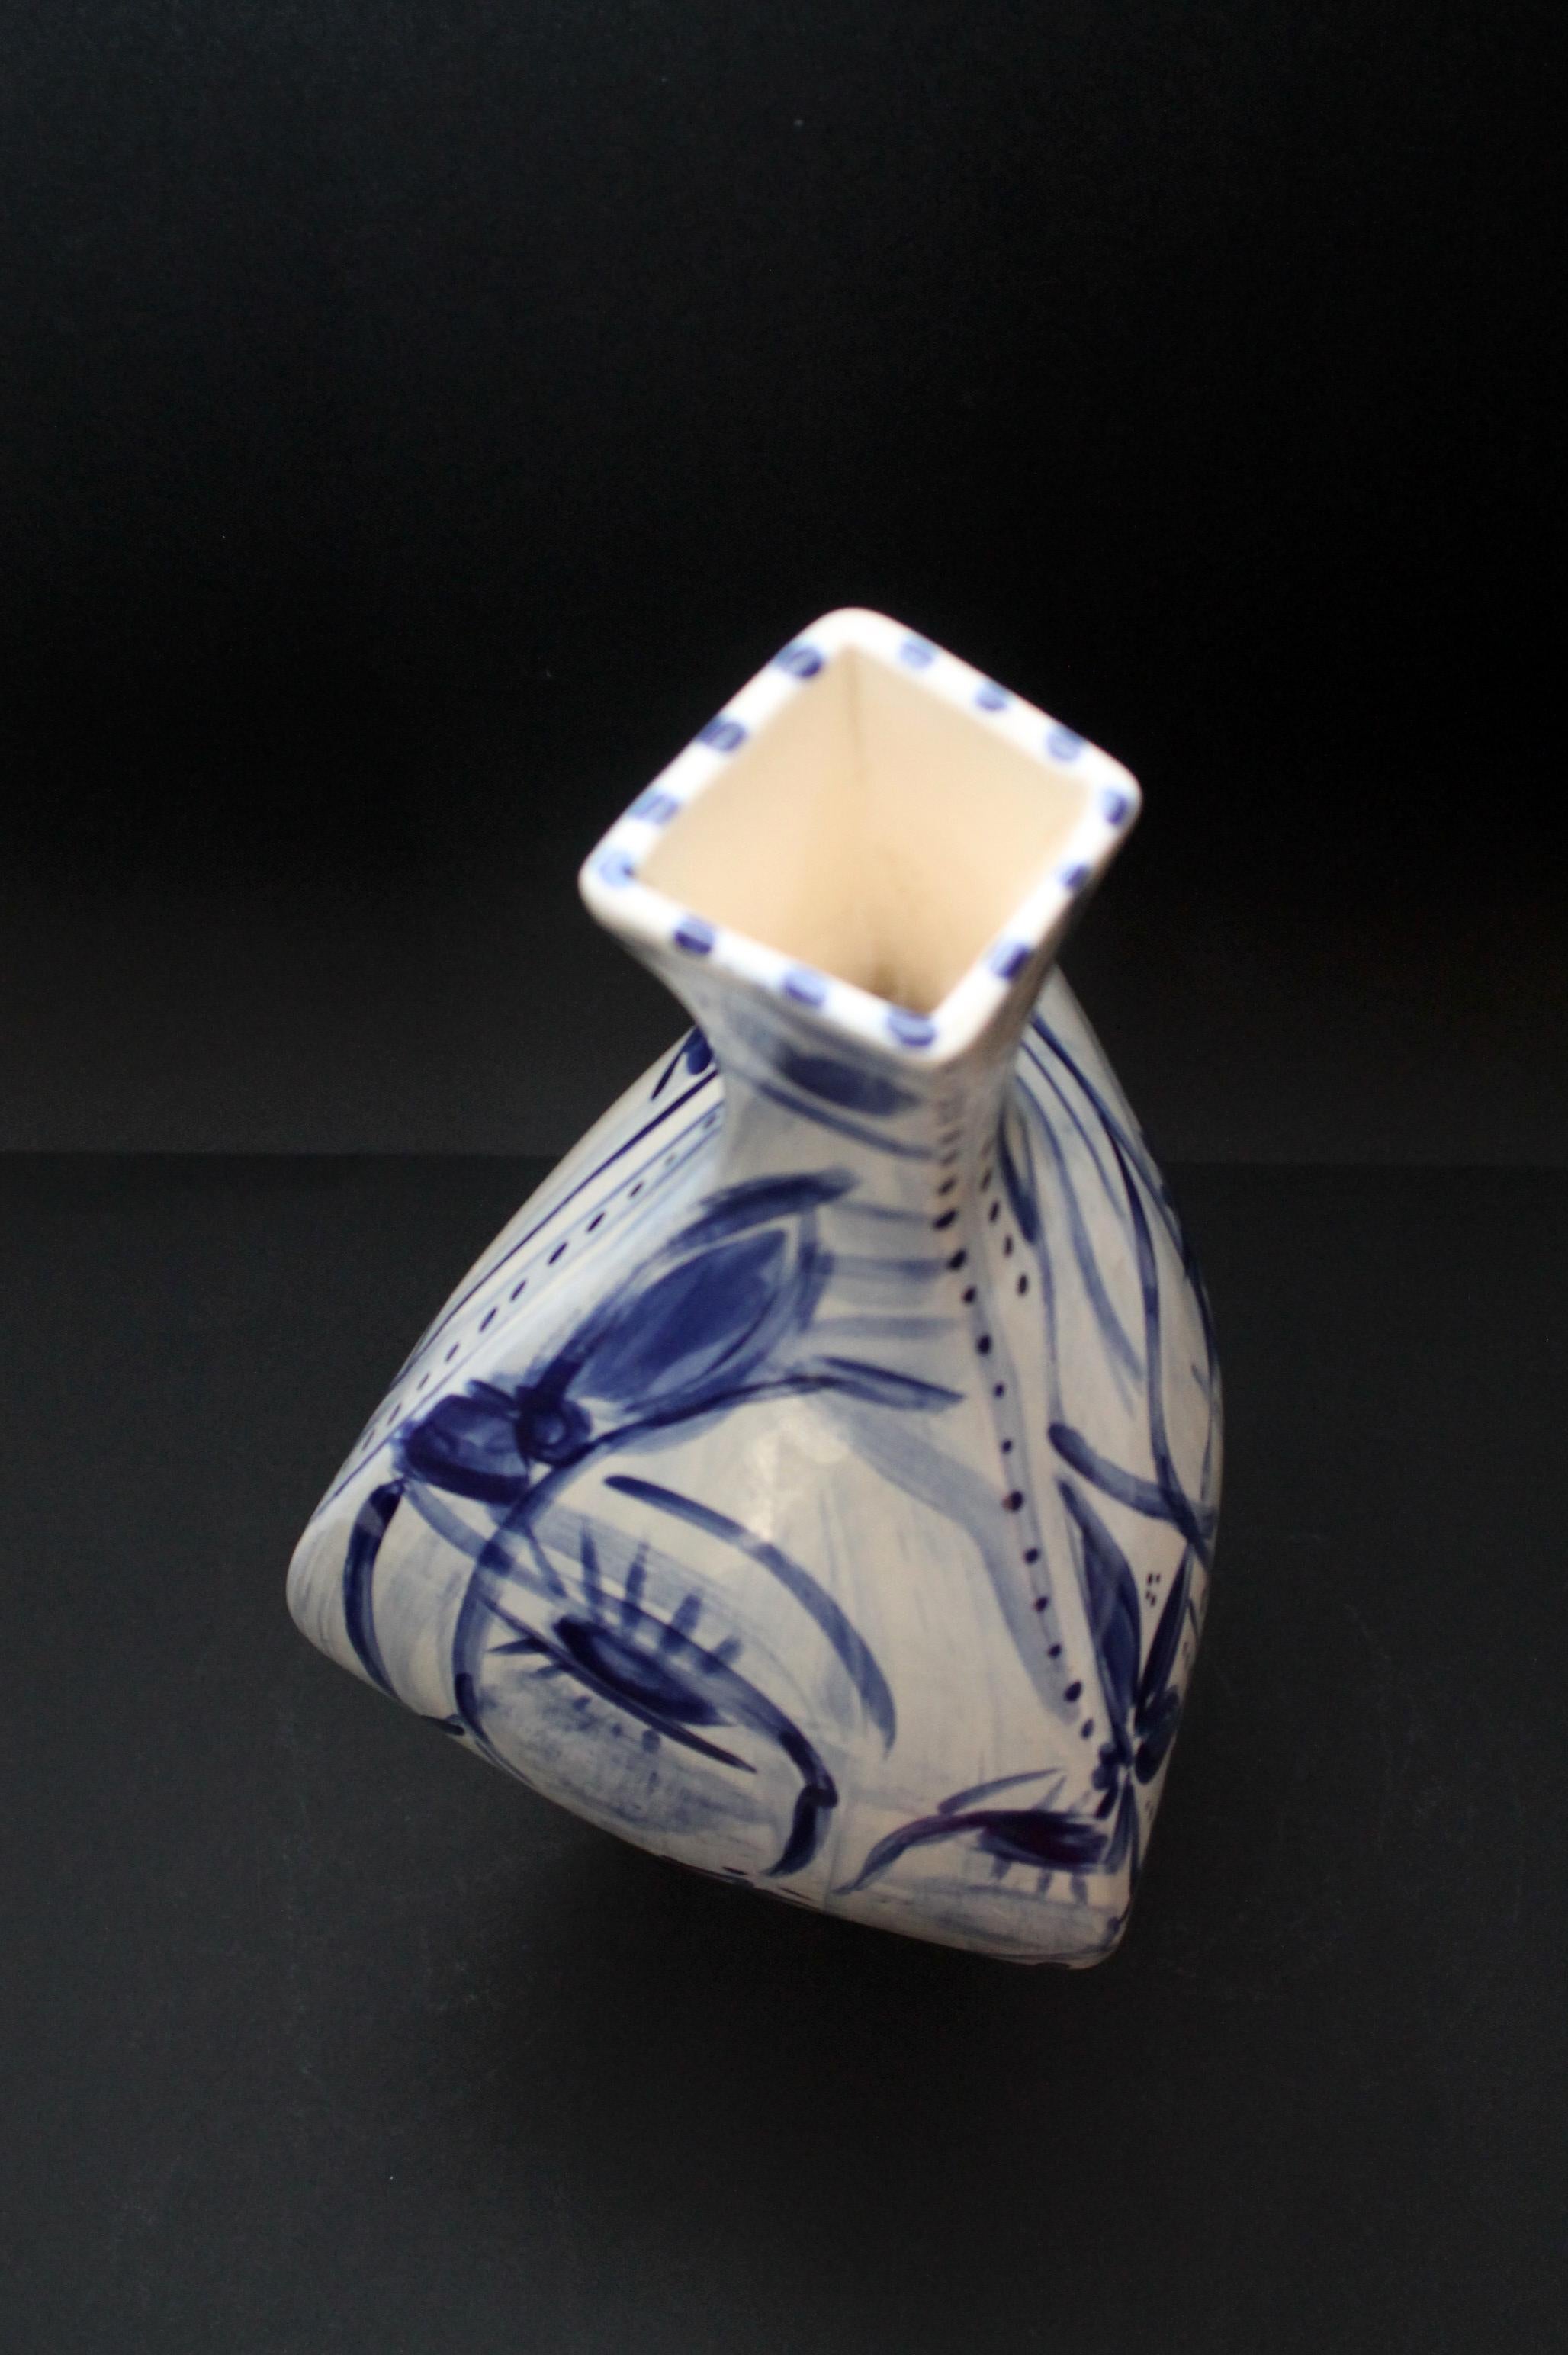 Cris Conde )) Amorphous (hand crafted/painted) signed ceramic vase (55x23x21cm) For Sale 2